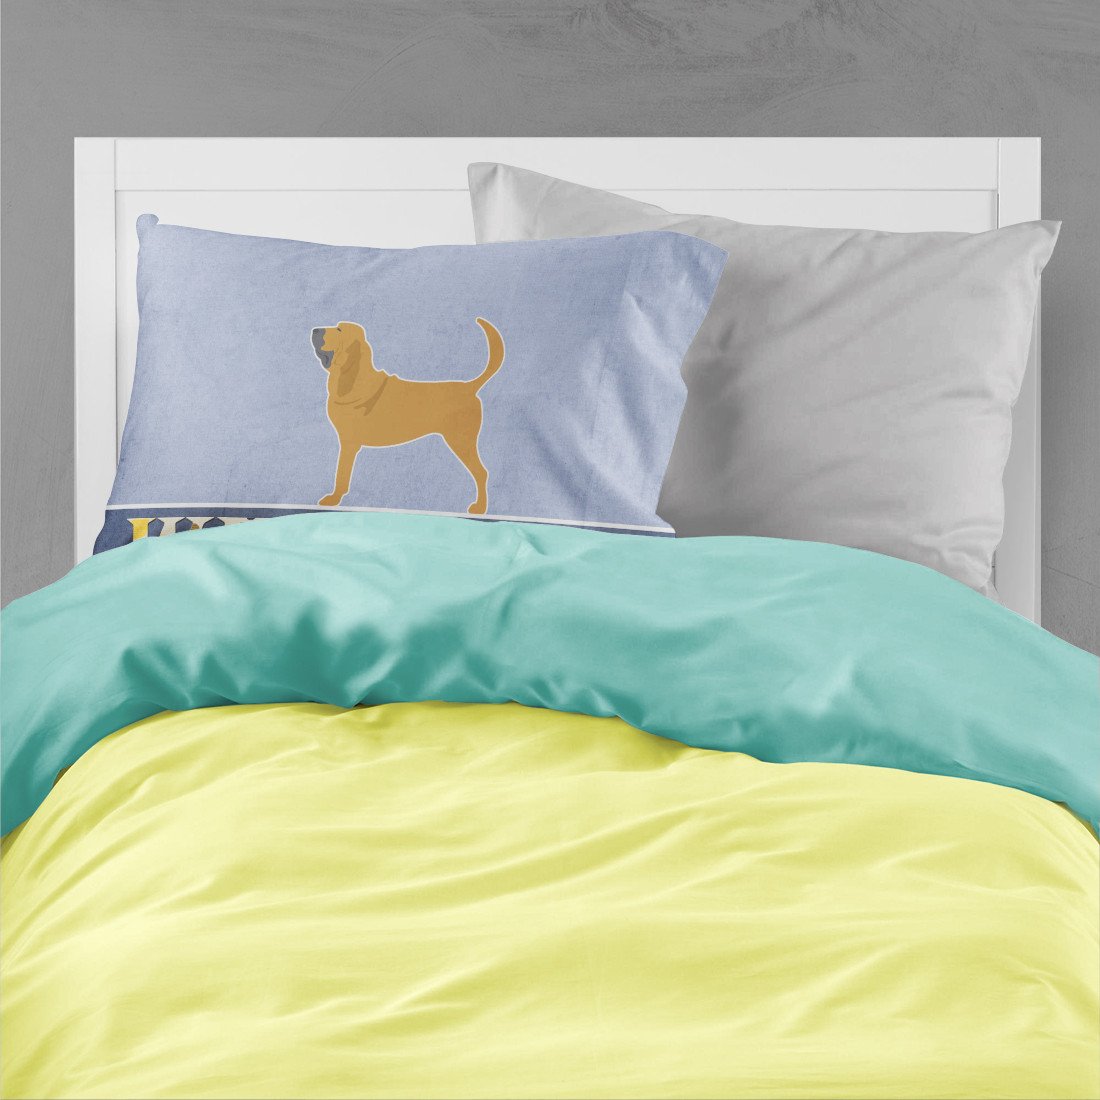 Bloodhound Welcome Fabric Standard Pillowcase BB5488PILLOWCASE by Caroline's Treasures